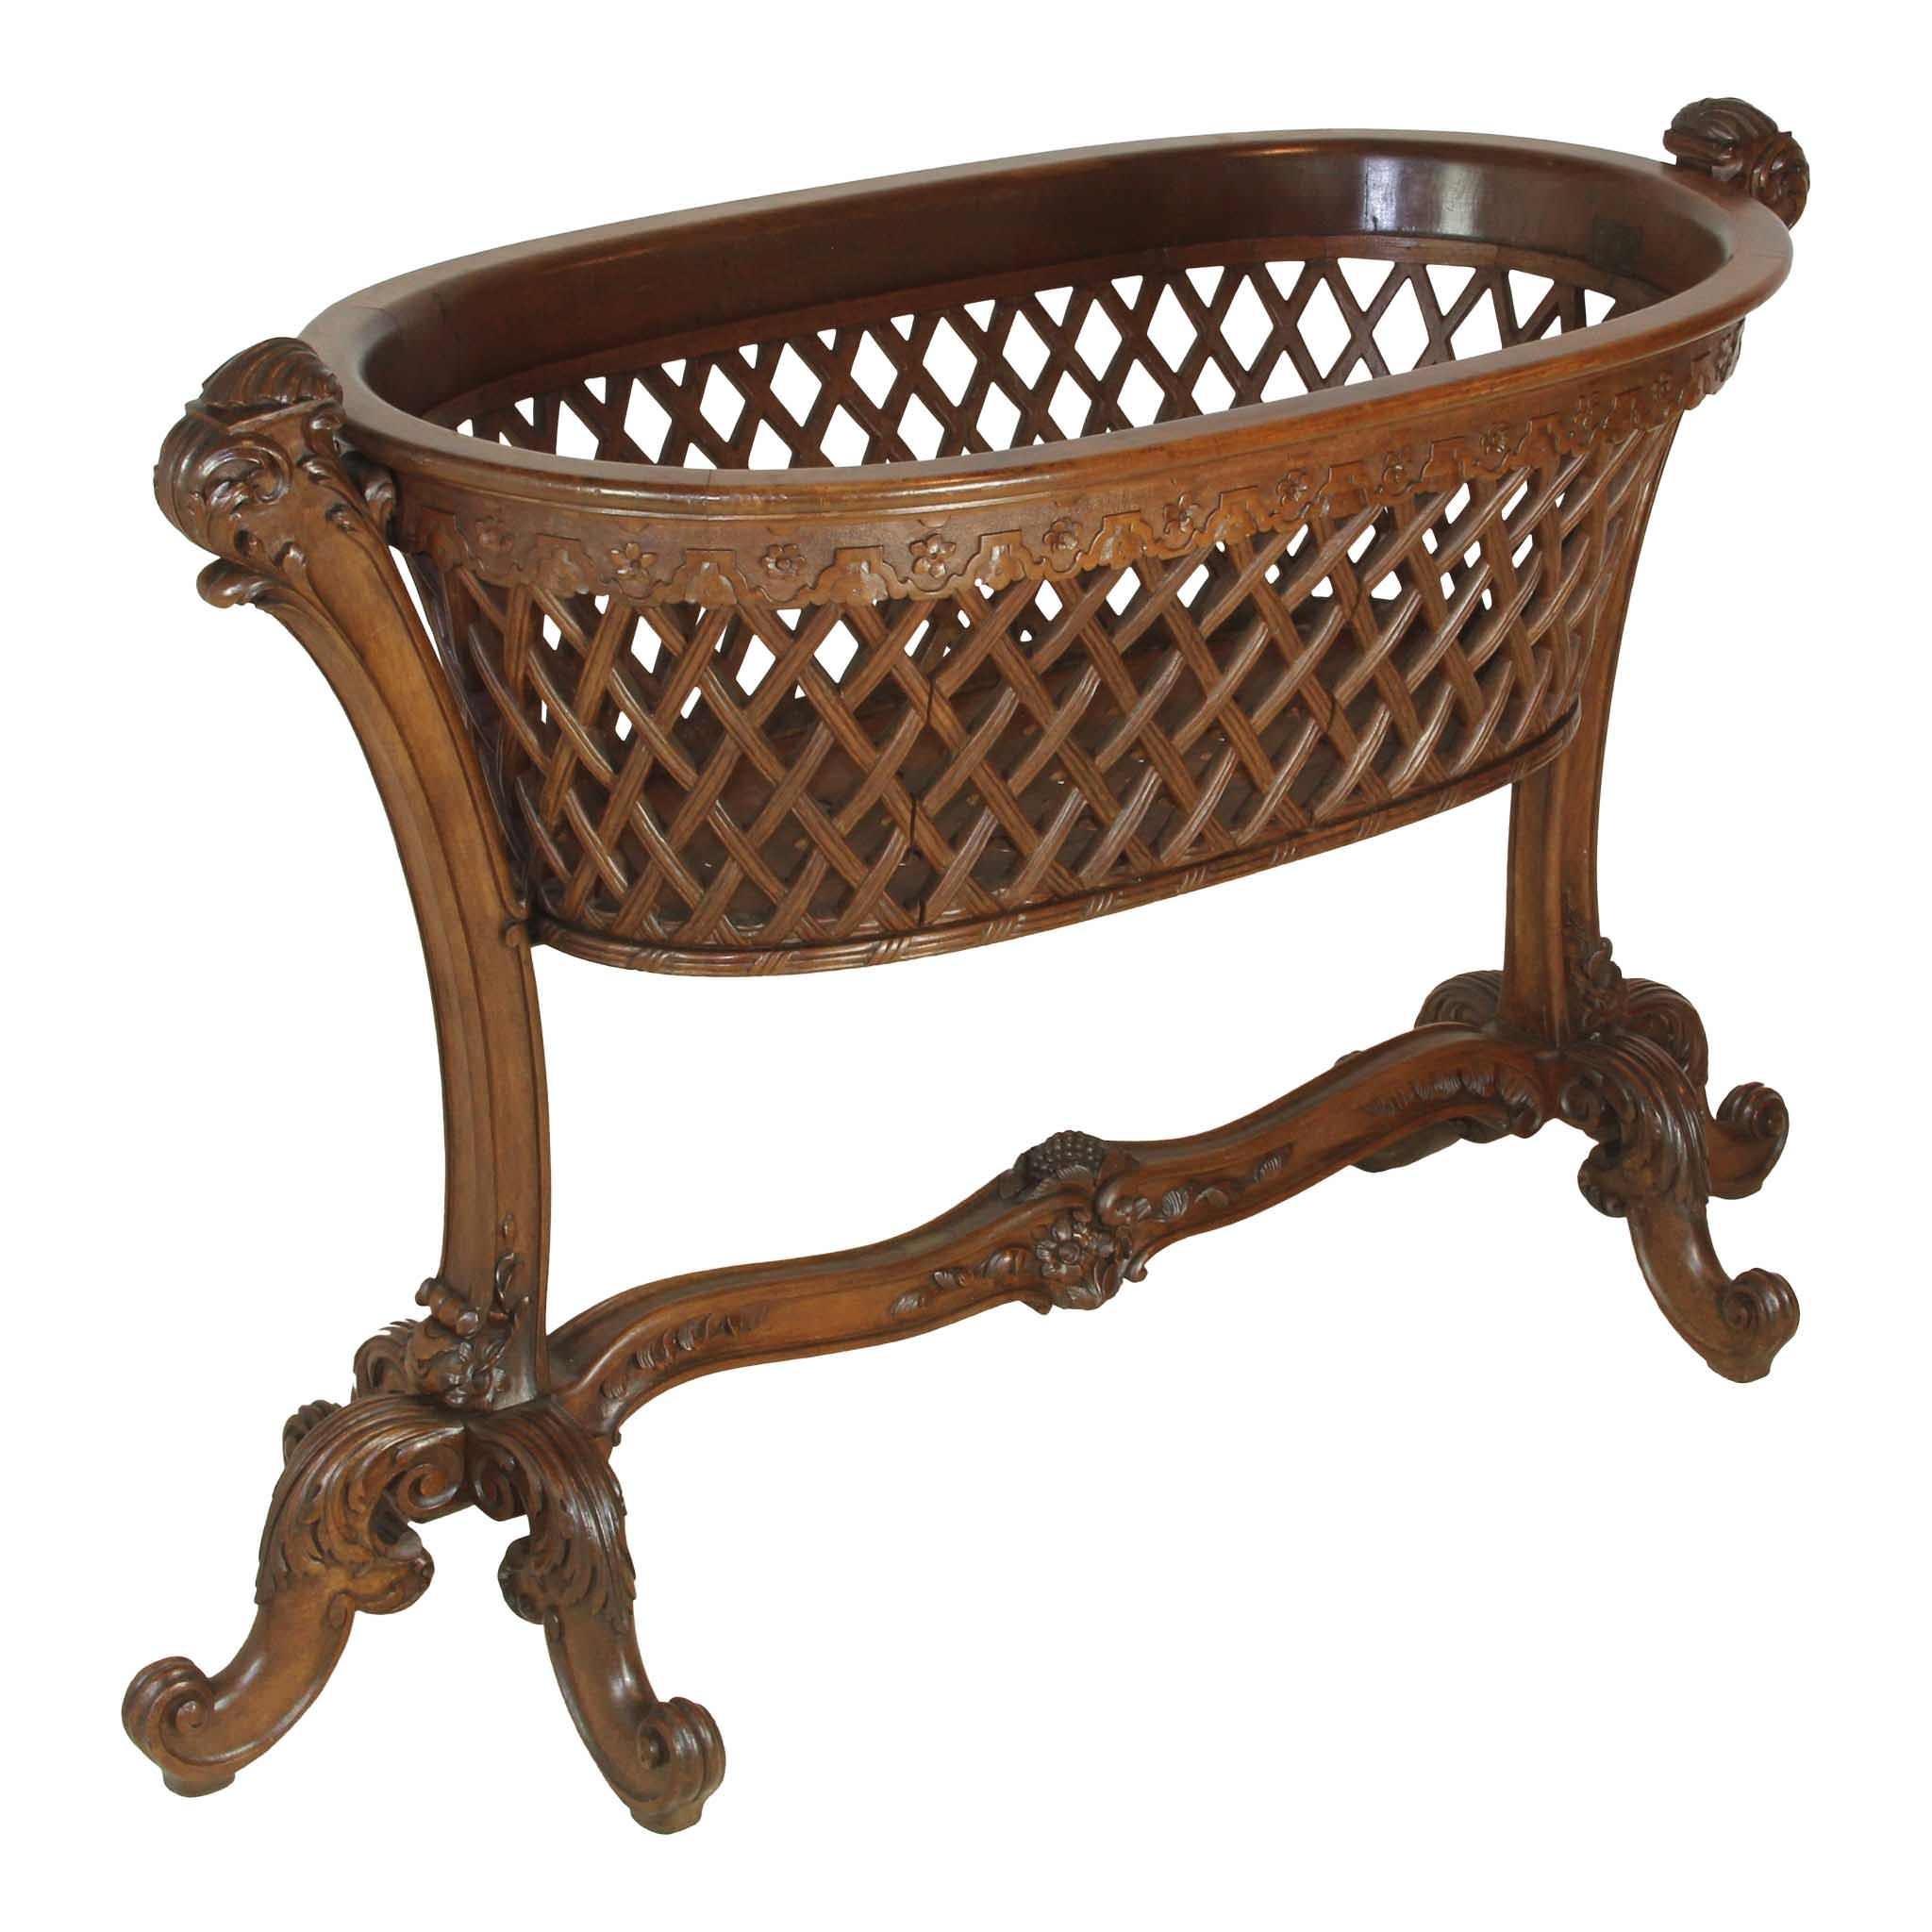 This delicately carved, walnut cradle features an oval, lattice basket supported by bowed posts terminating in tripod feet. The feet begin with acanthus leaves and end in decorative scrolls. The tripods are united by a stretcher, which is carved